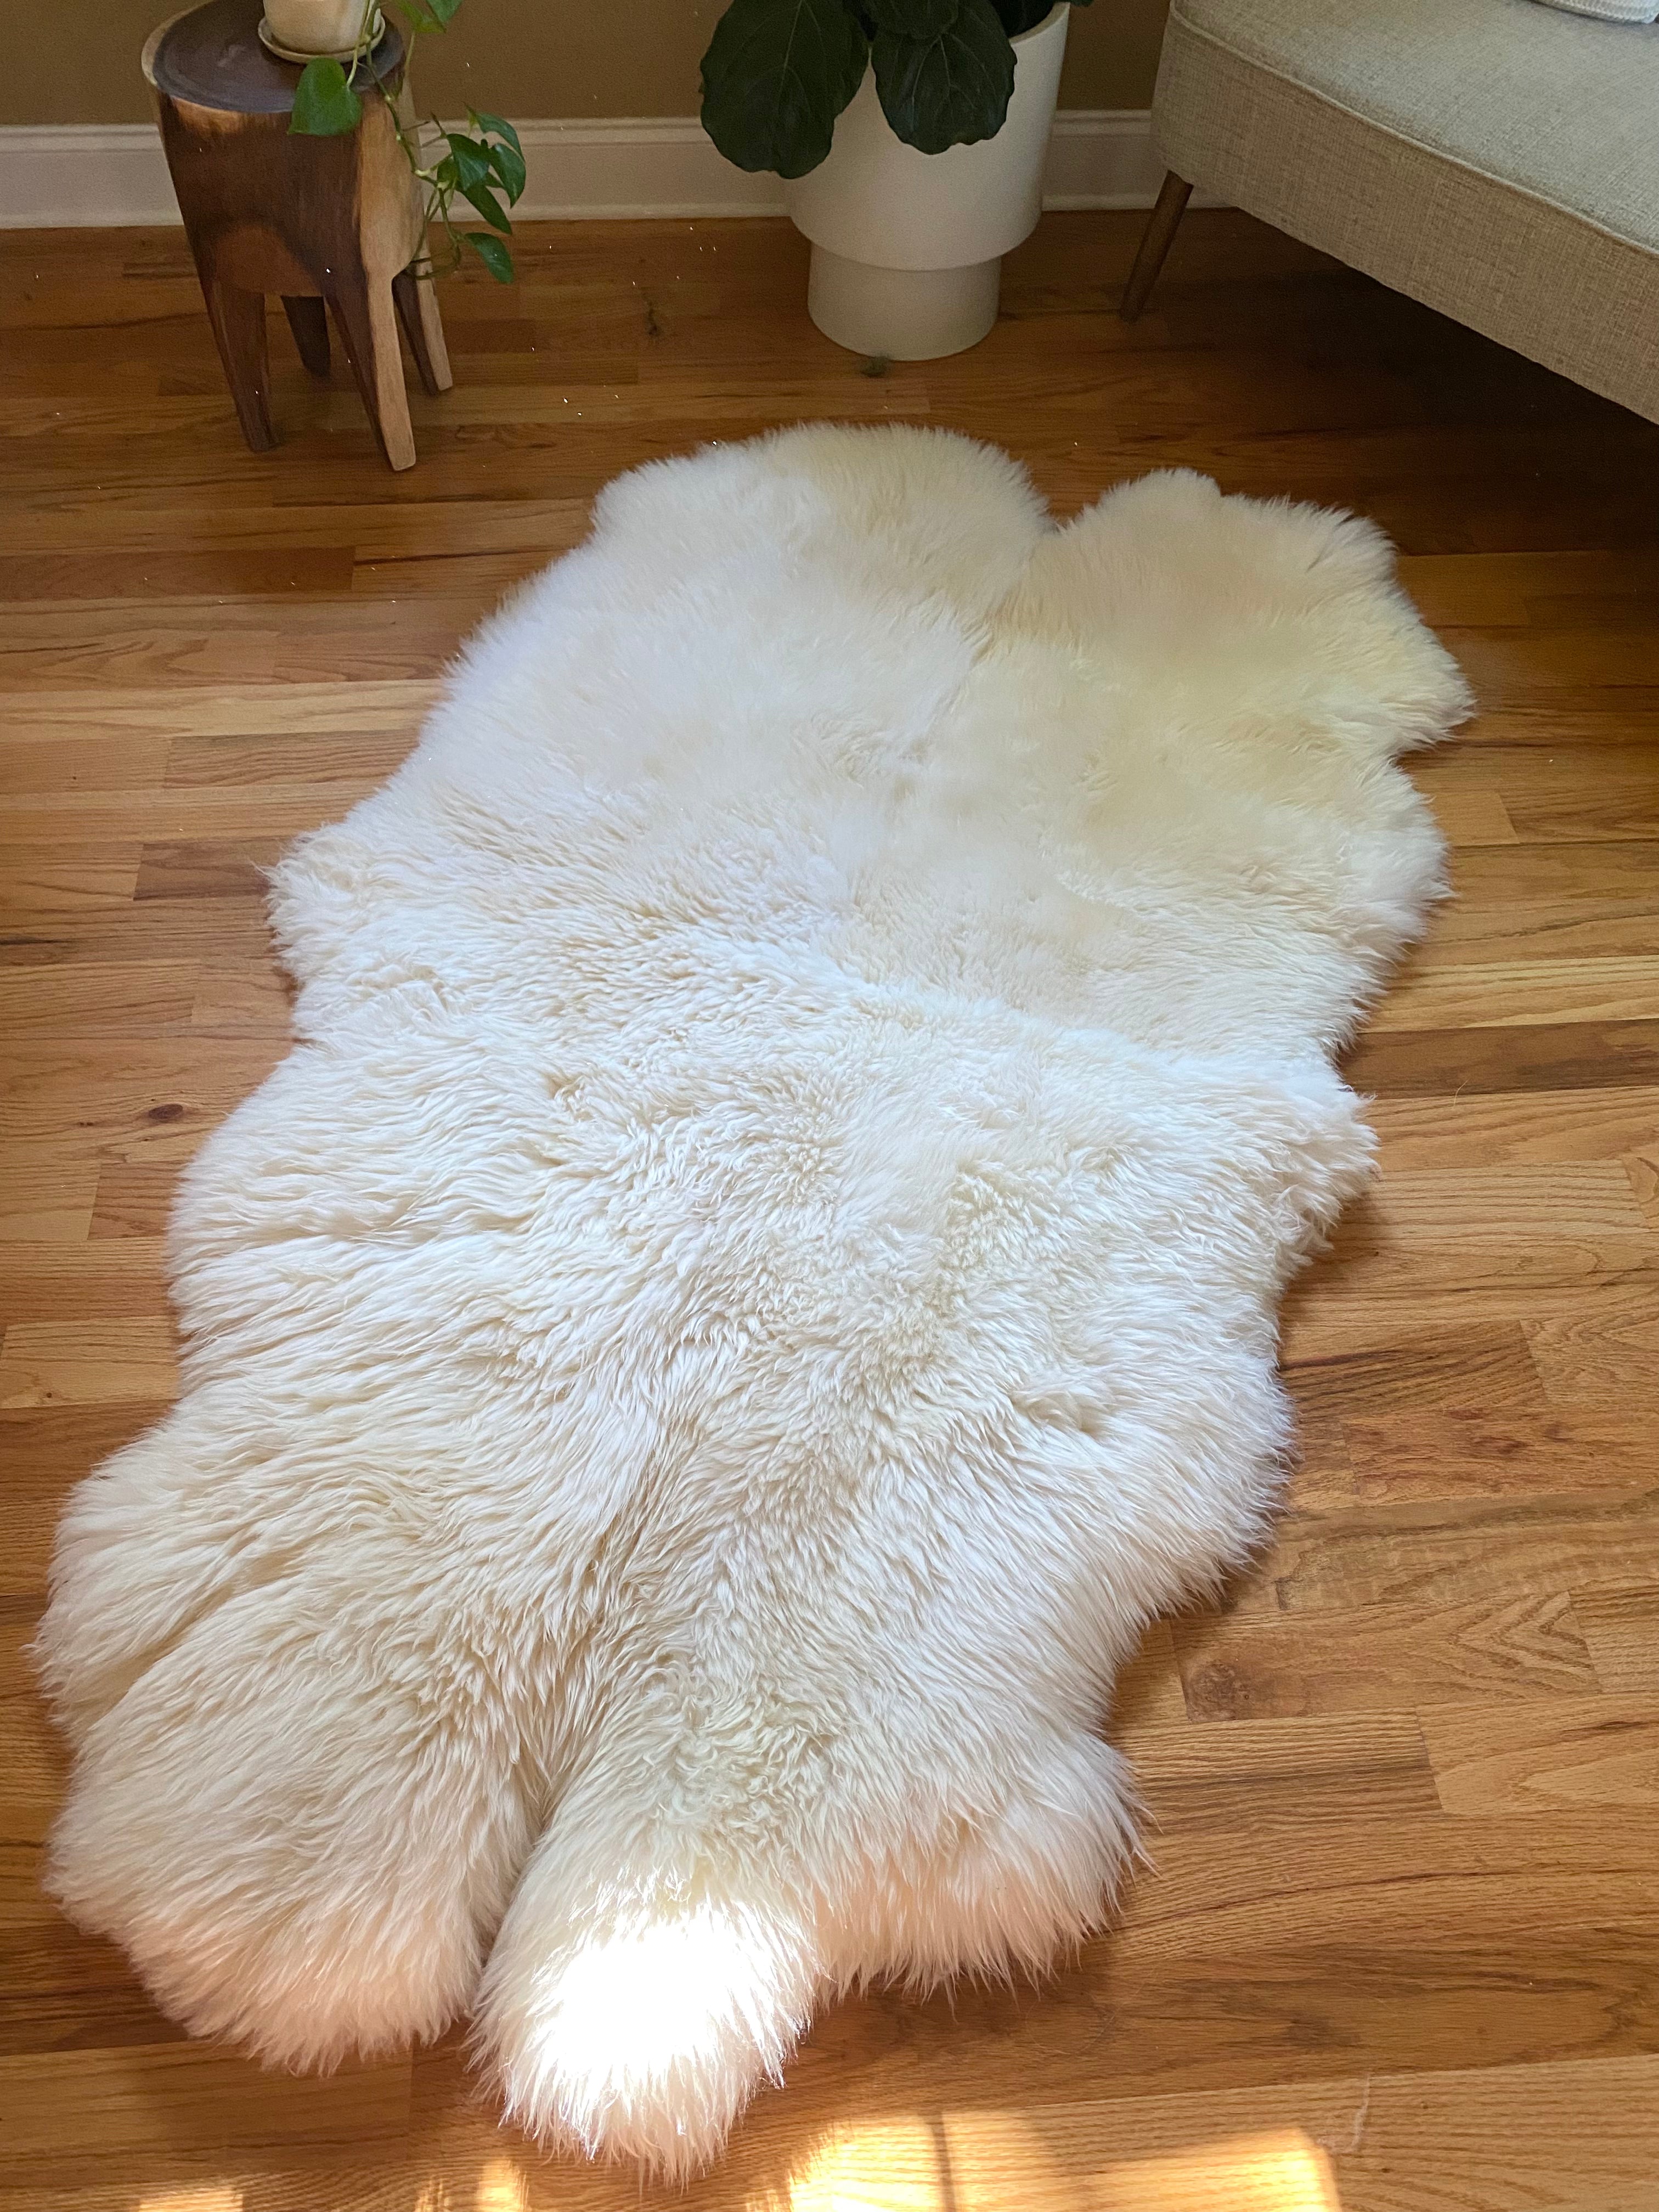 THE HEALTH BENEFITS AND EFFECTS OF SHEEPSKIN RUGS– East Perry